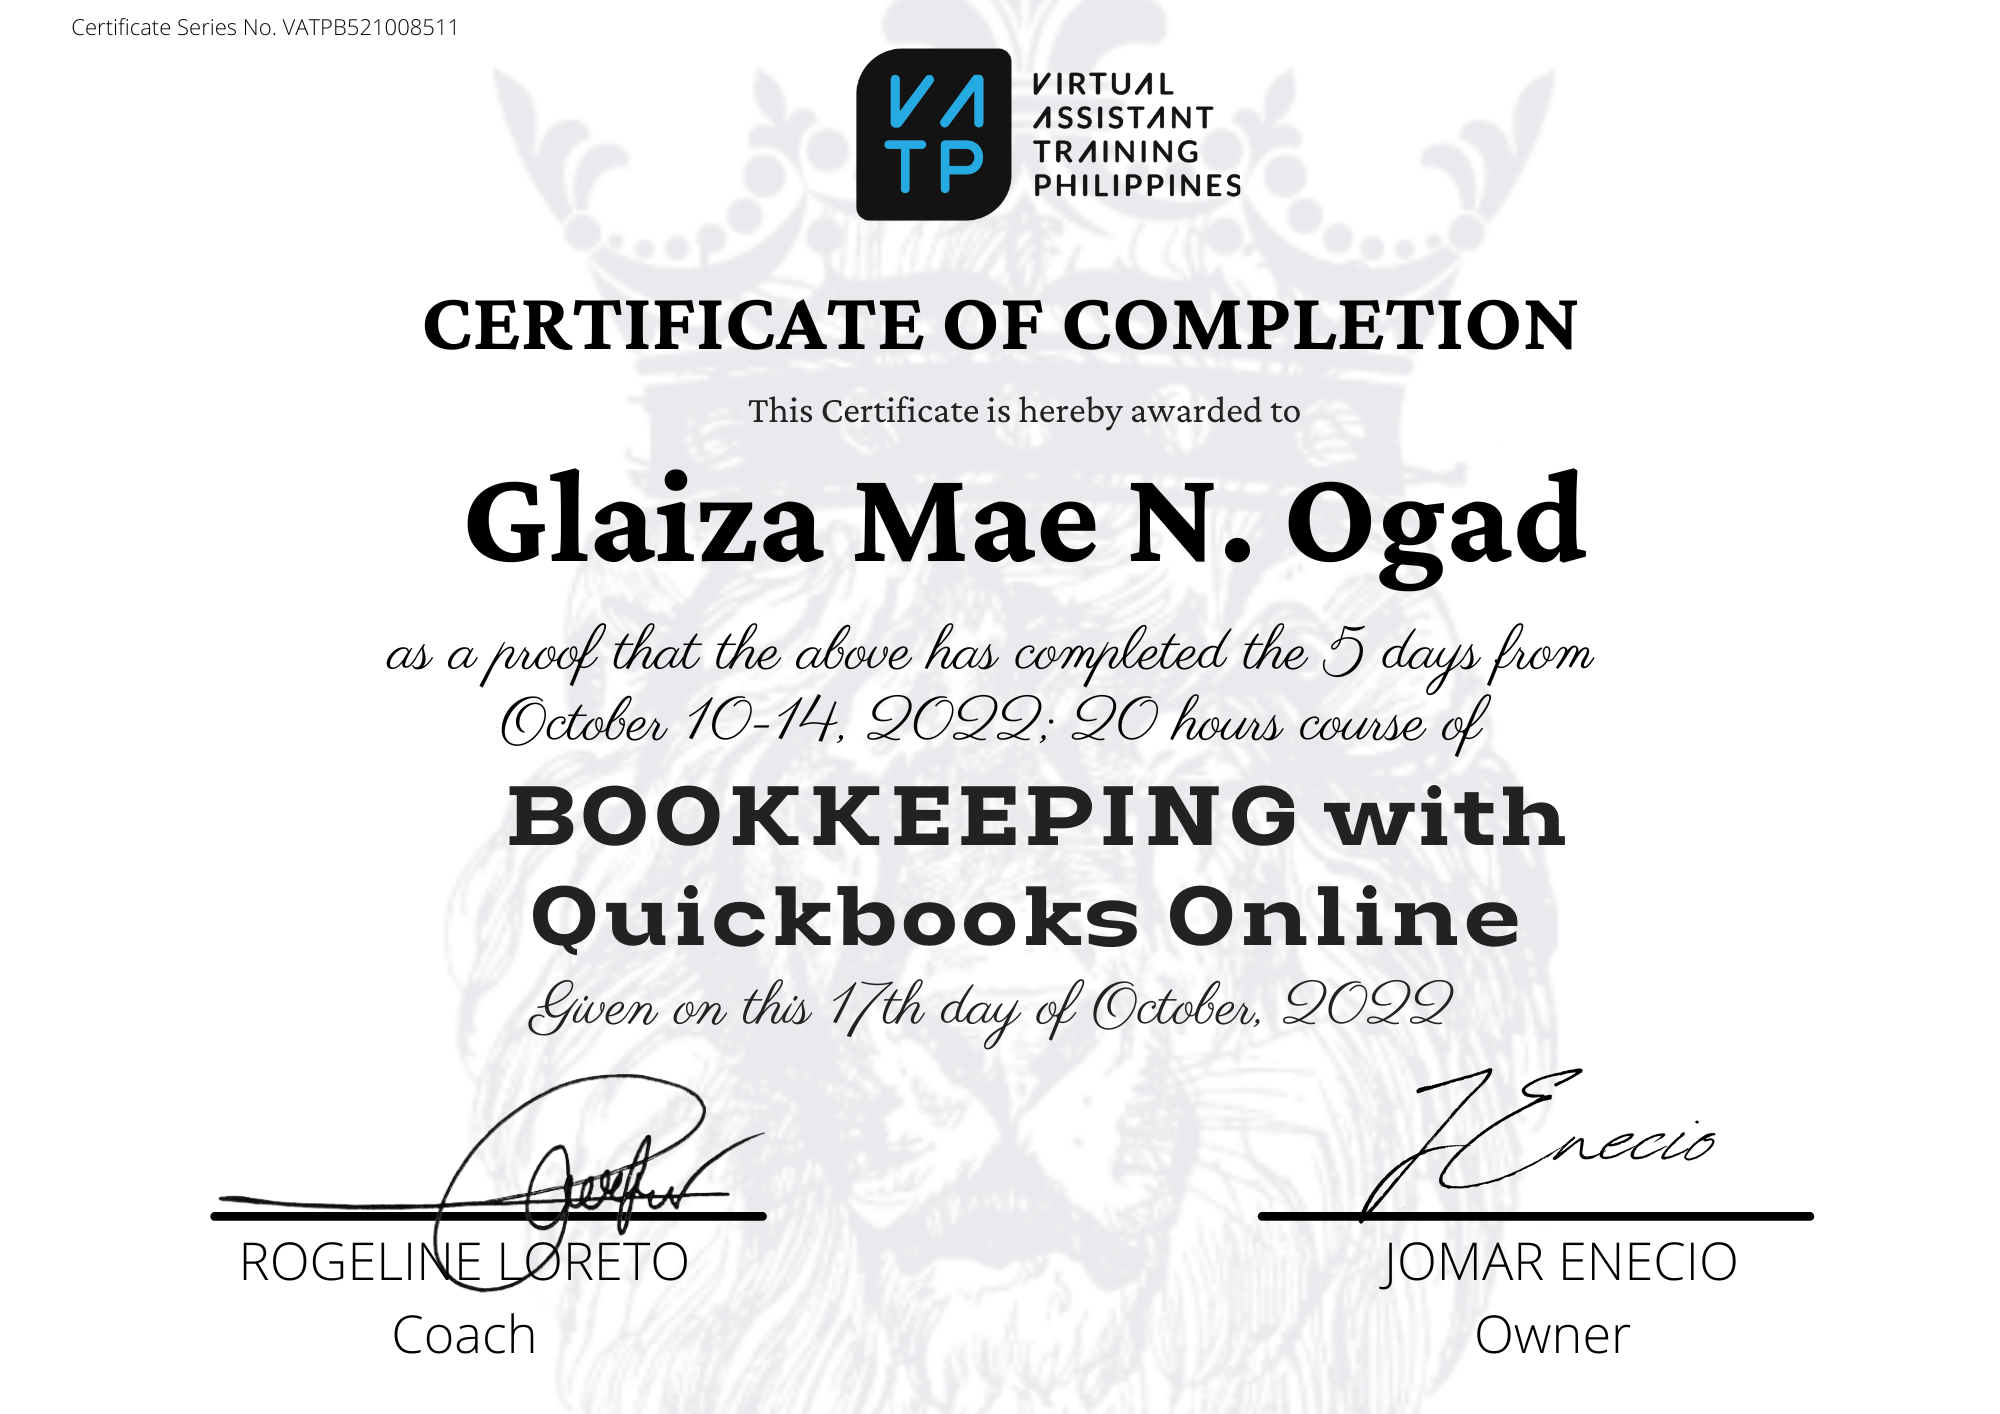 Bookkeeping with Quickbooks Online